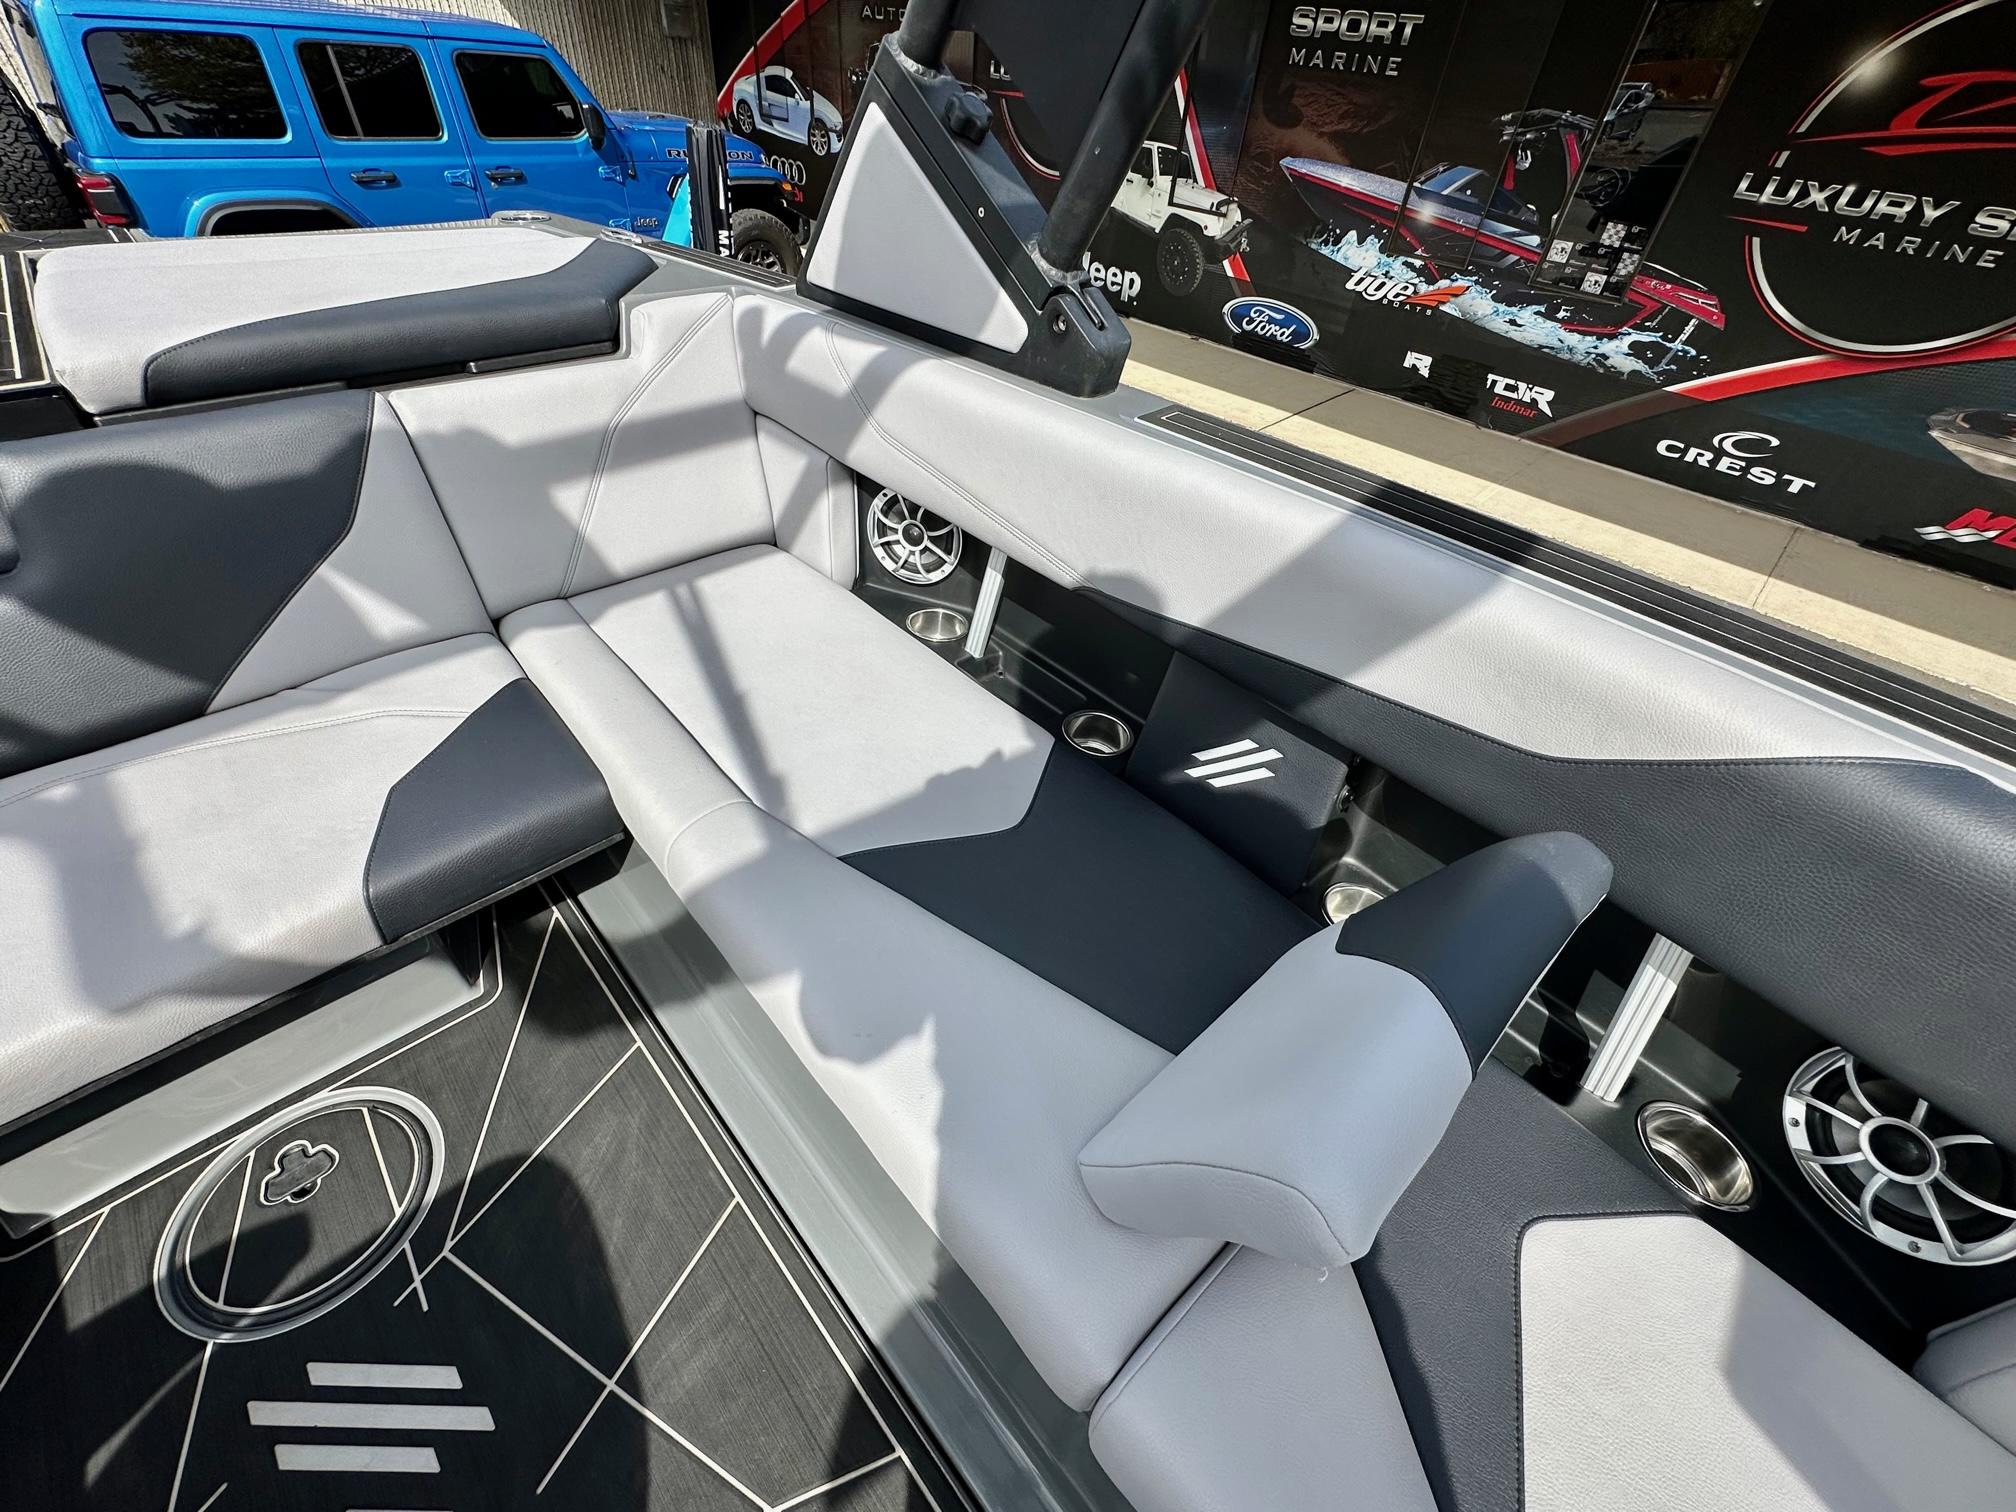 2021 ATX Surf Boats 20 Type-S